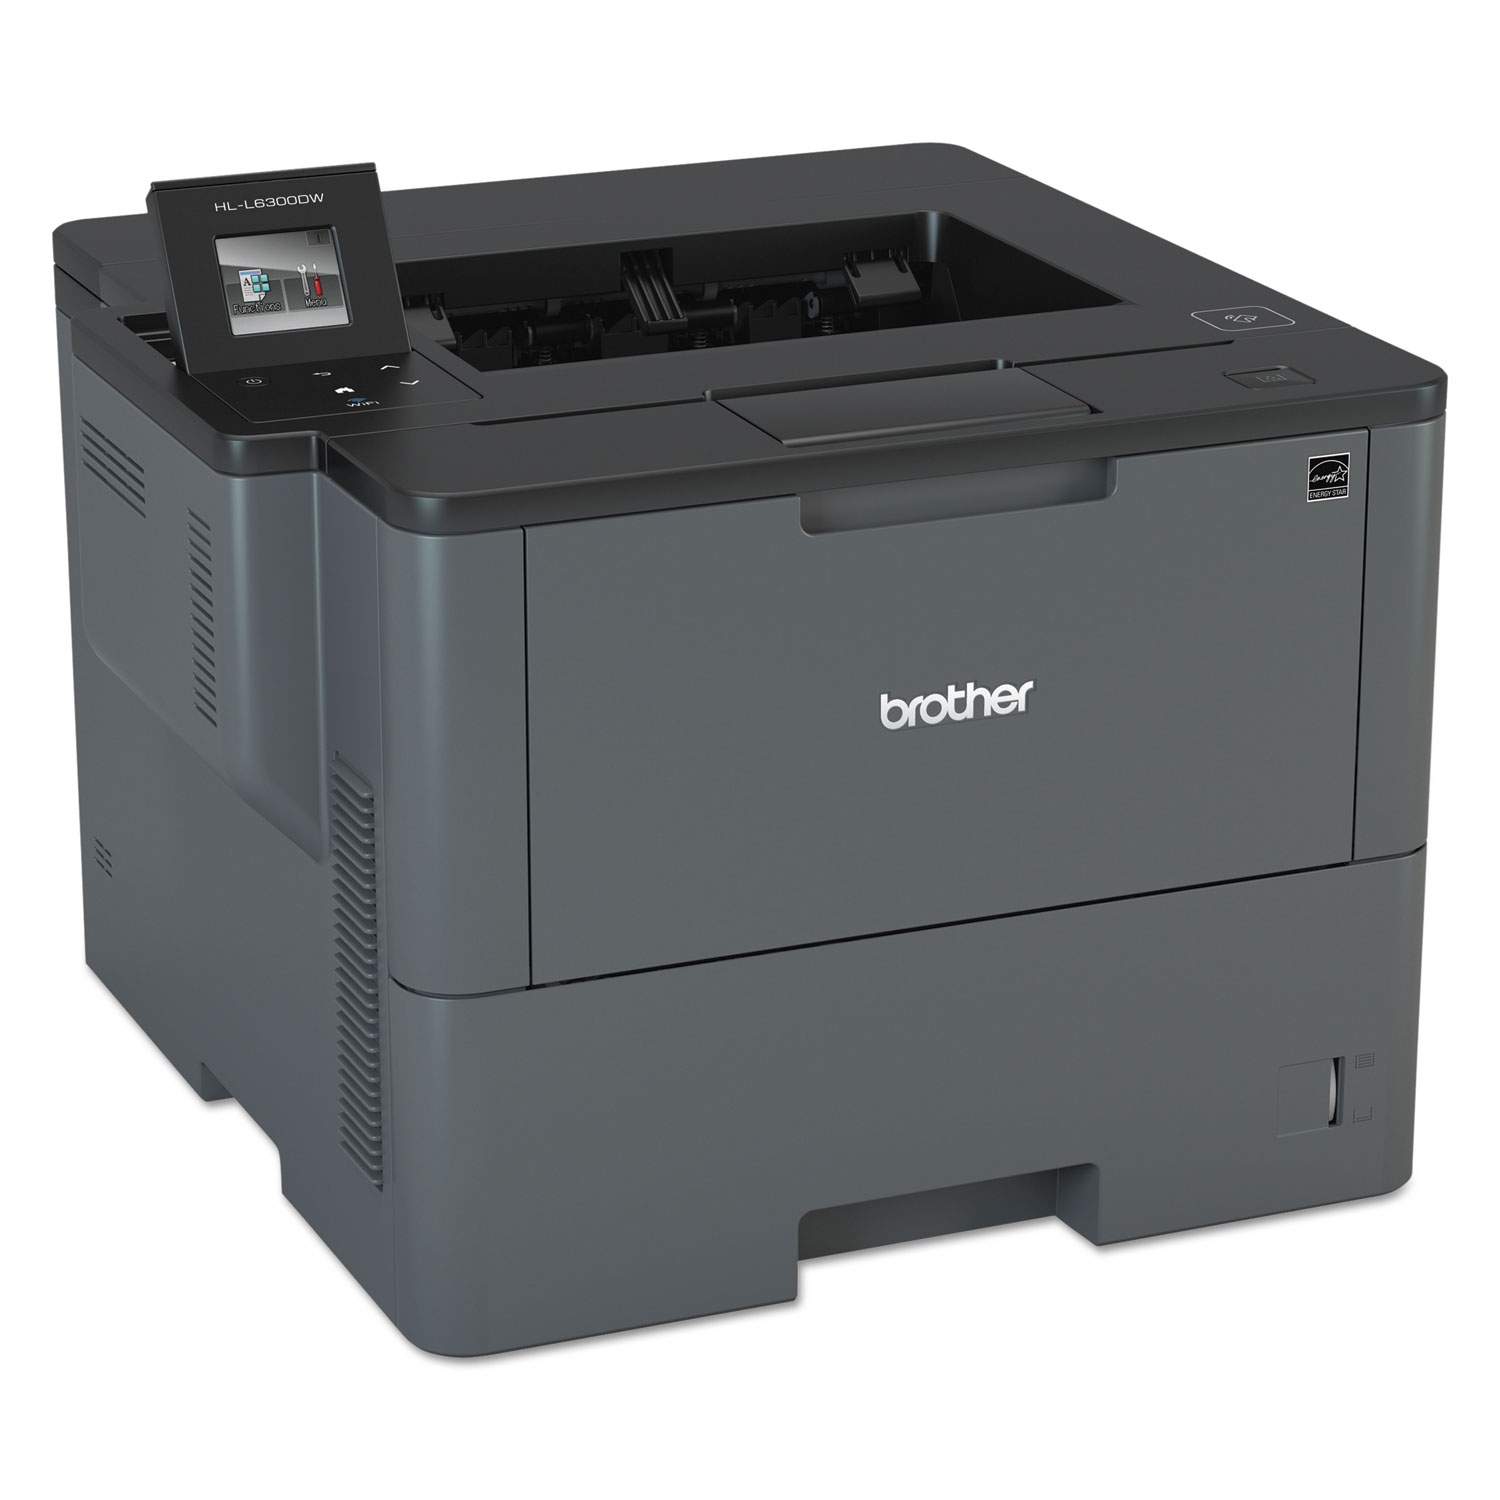 HL-L6300DW Business Laser Printer for Mid-Size Workgroups w/Higher Print Volumes